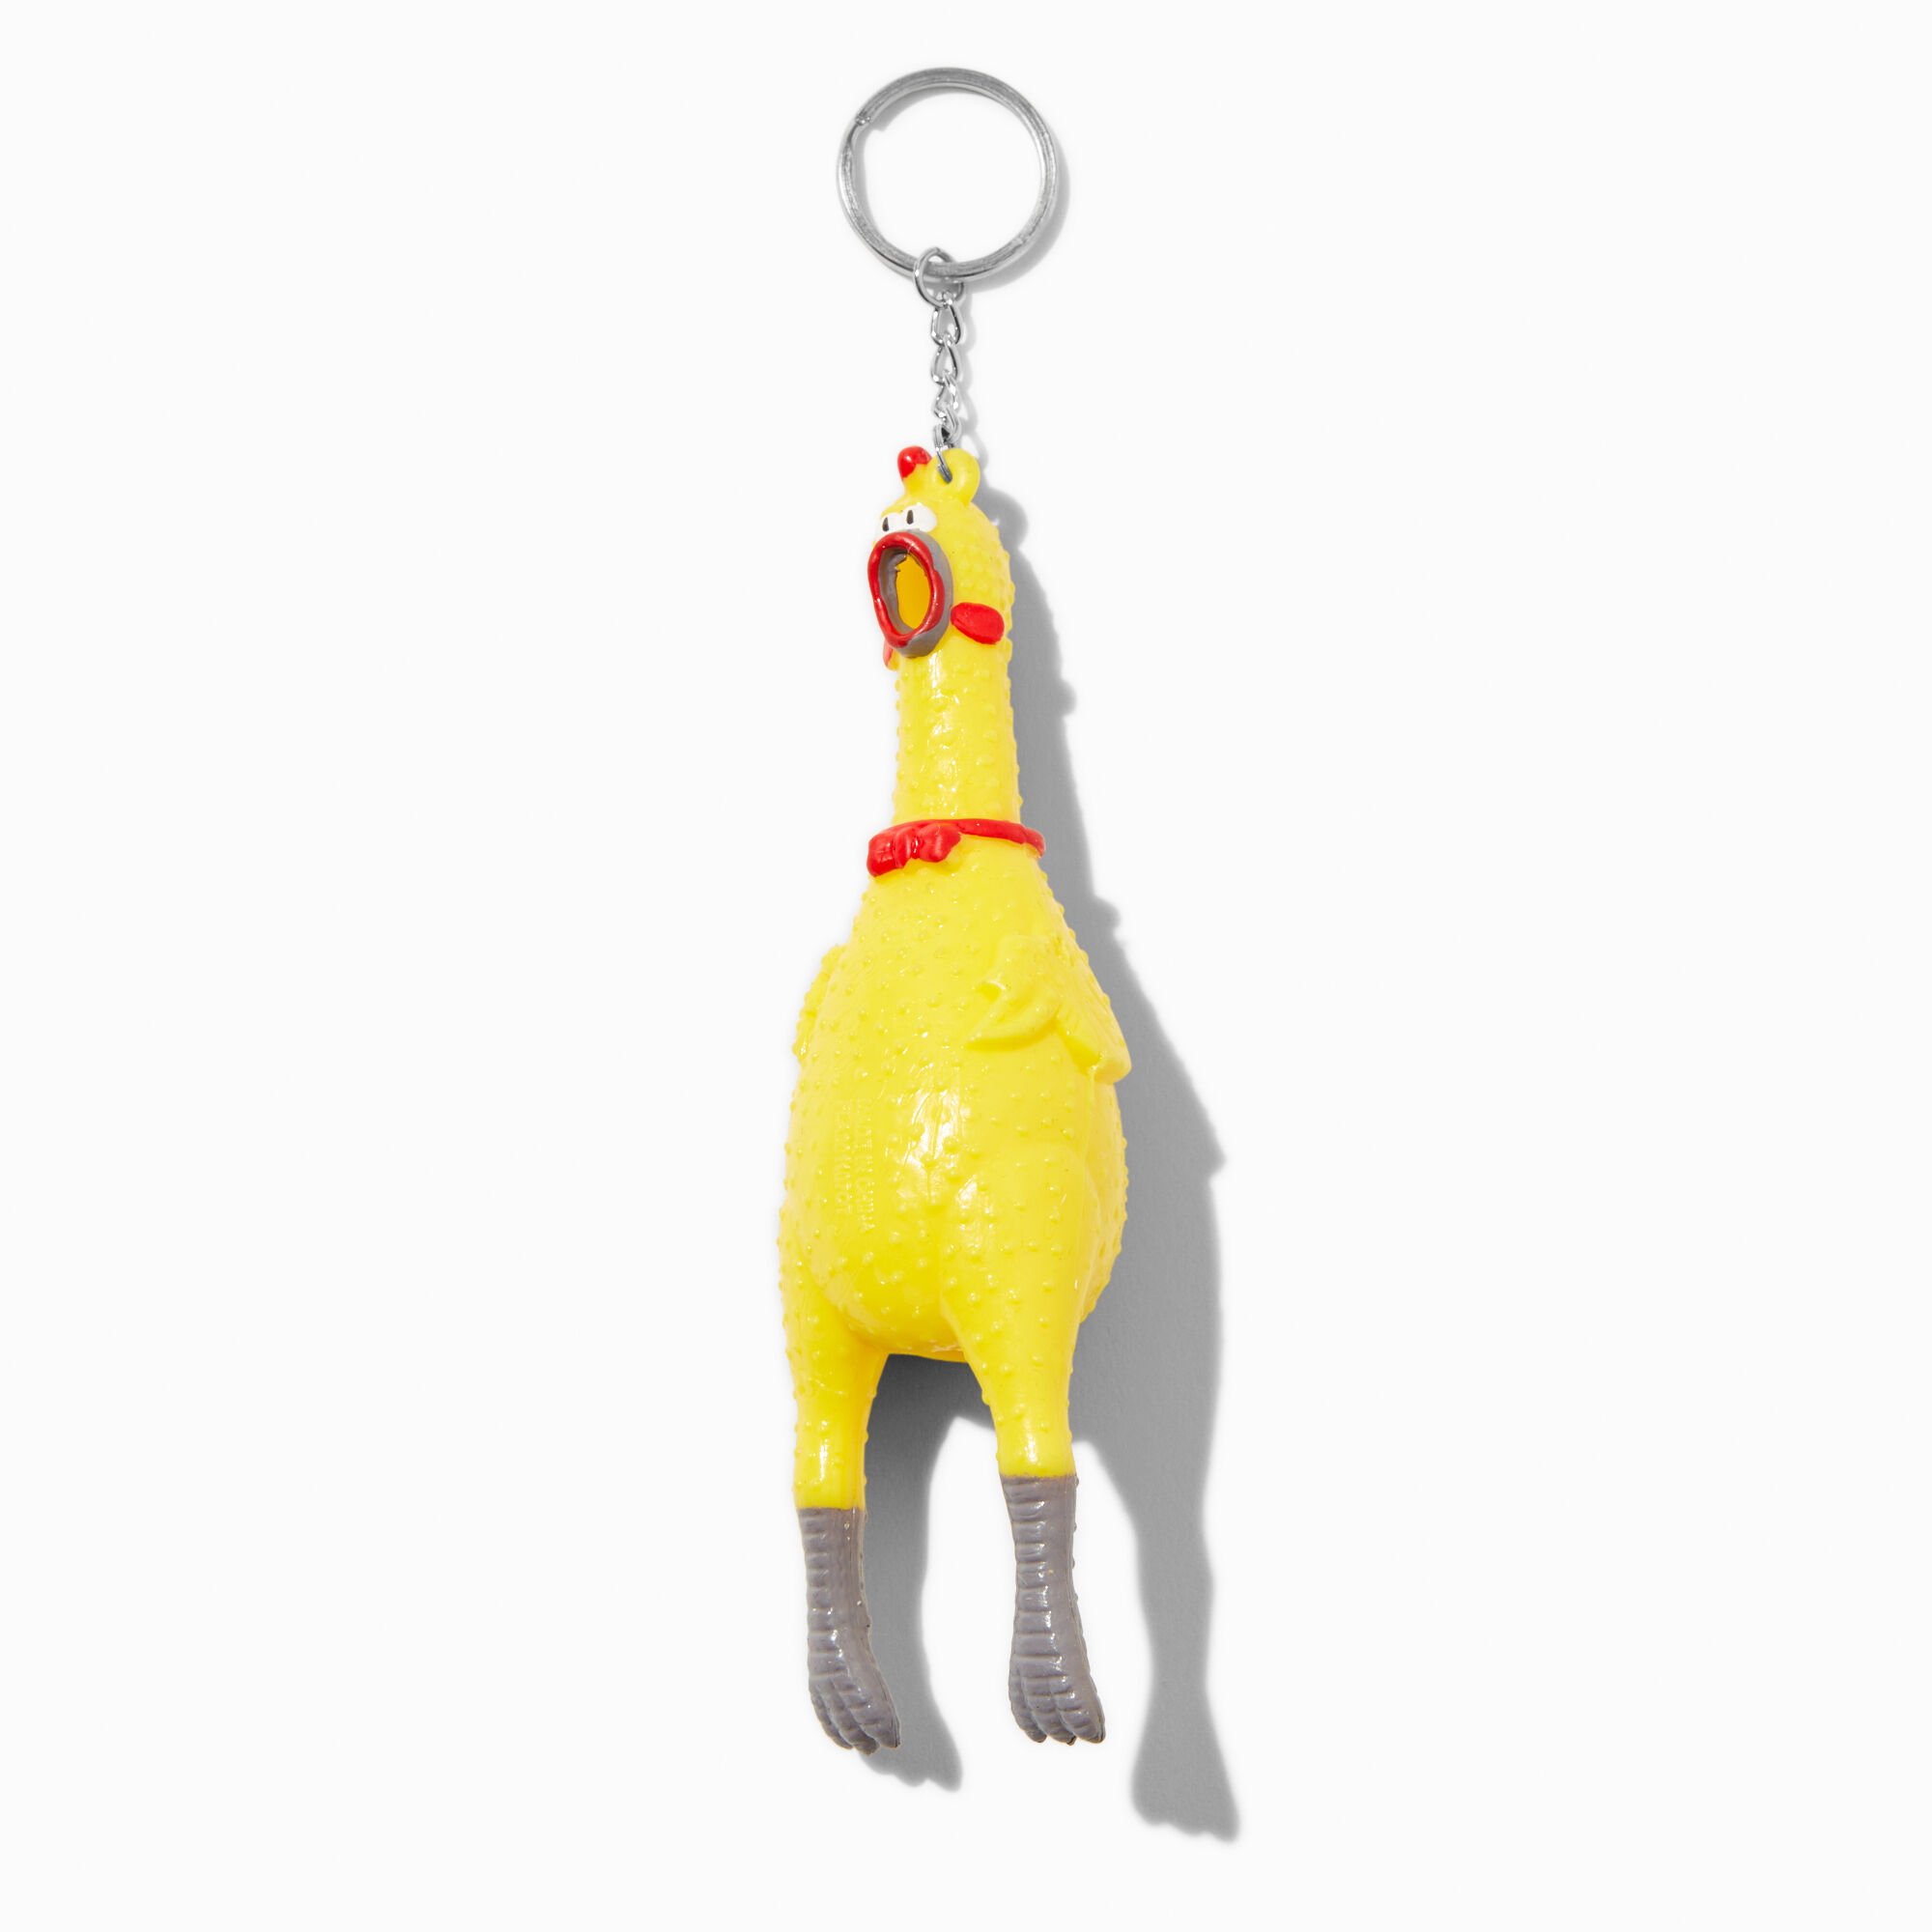 View Claires Rubber Chicken Squeeze Keyring information